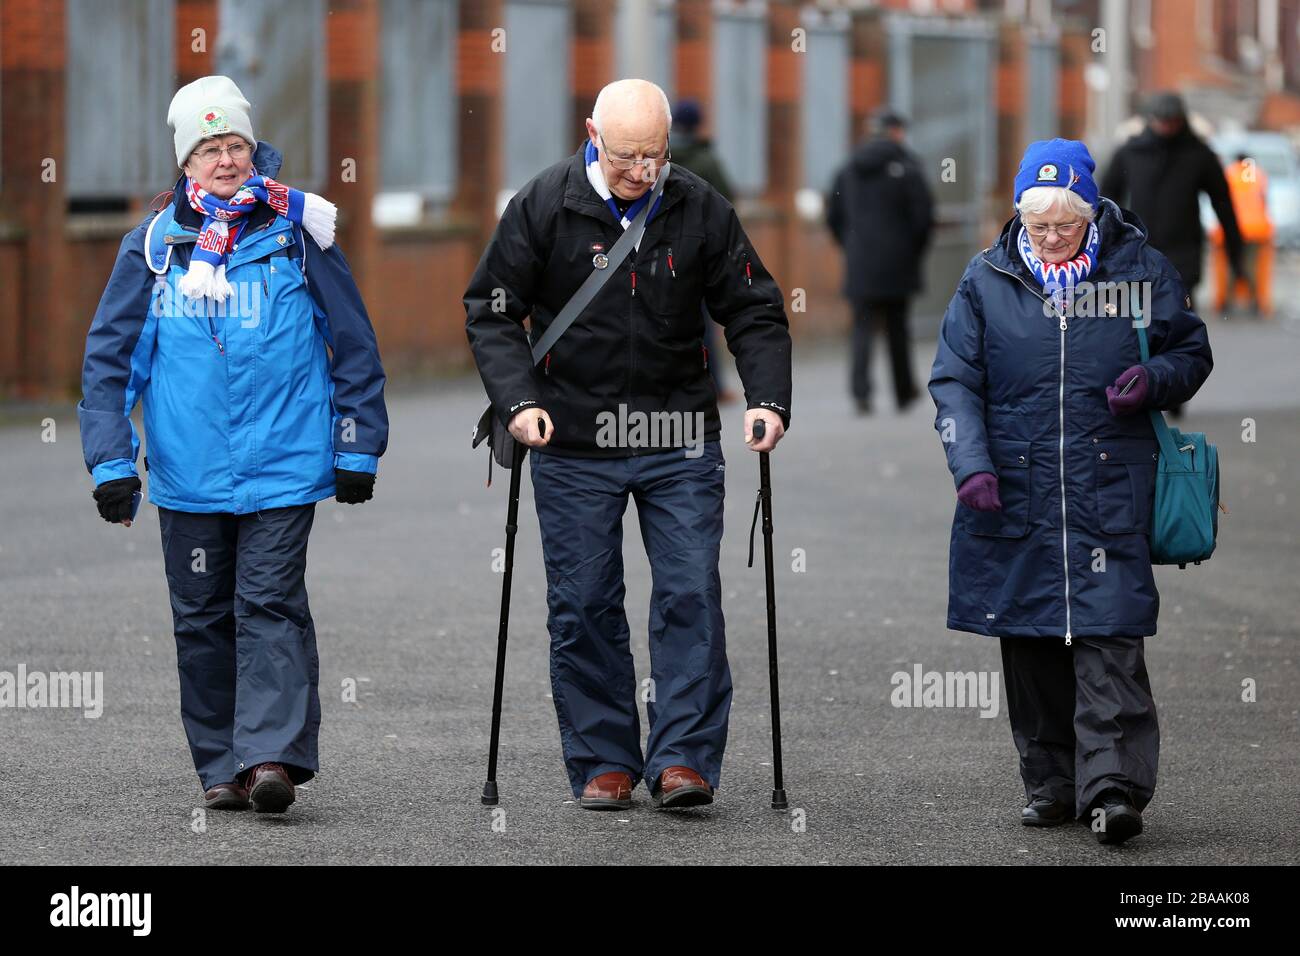 Blackburn Rovers fans arrive ahead of the Sky Bet Championship match at Ewood Park Stock Photo